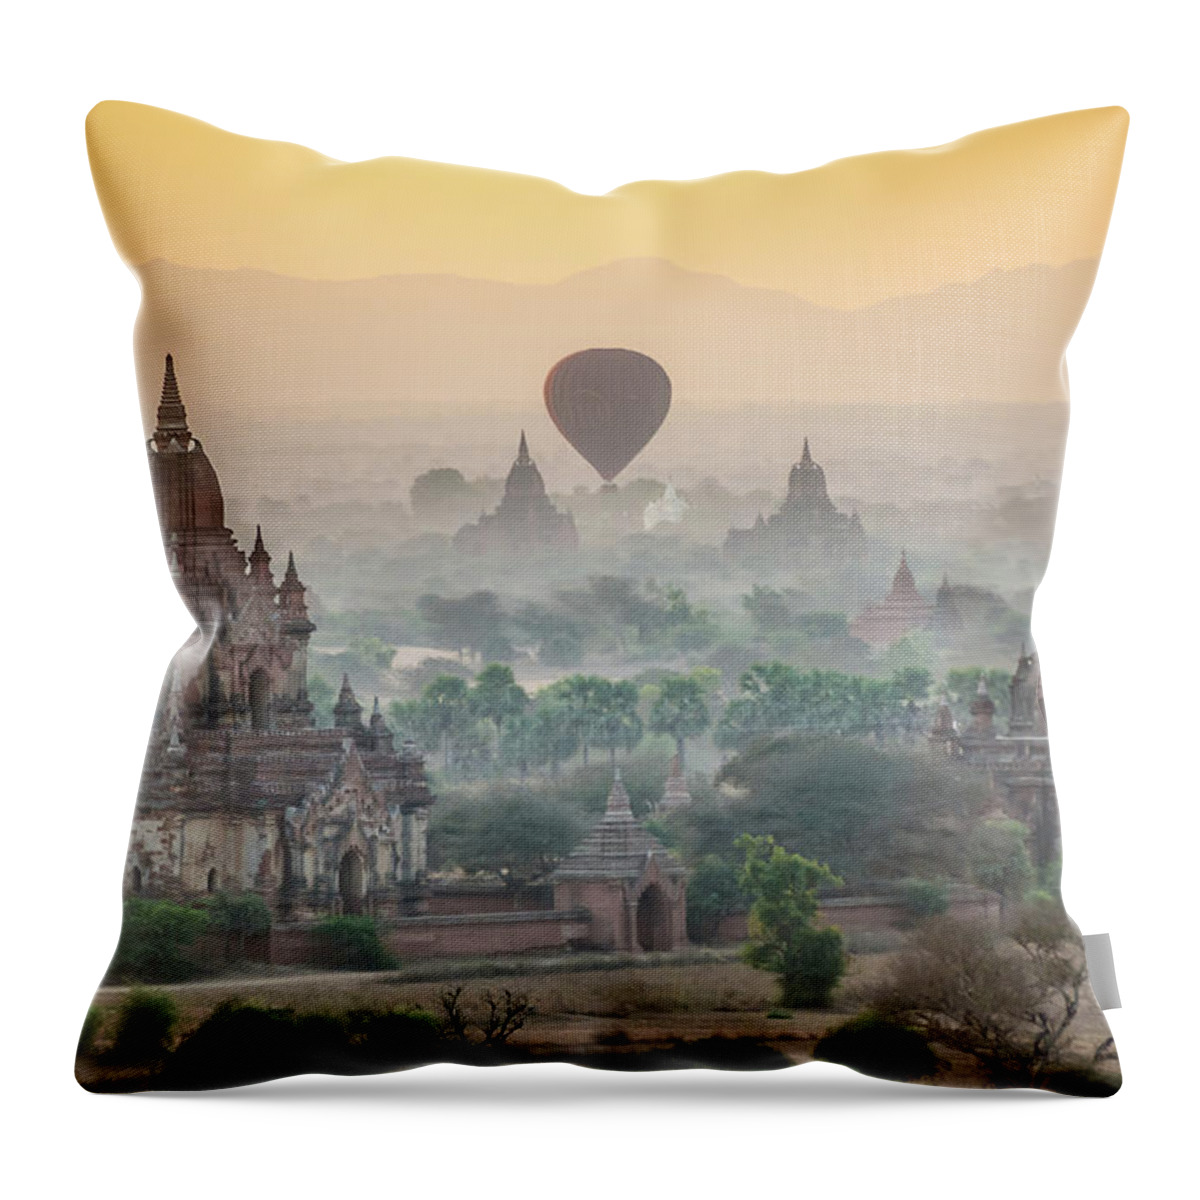 Sunrise Throw Pillow featuring the photograph Sunrise at Bagan by Arj Munoz